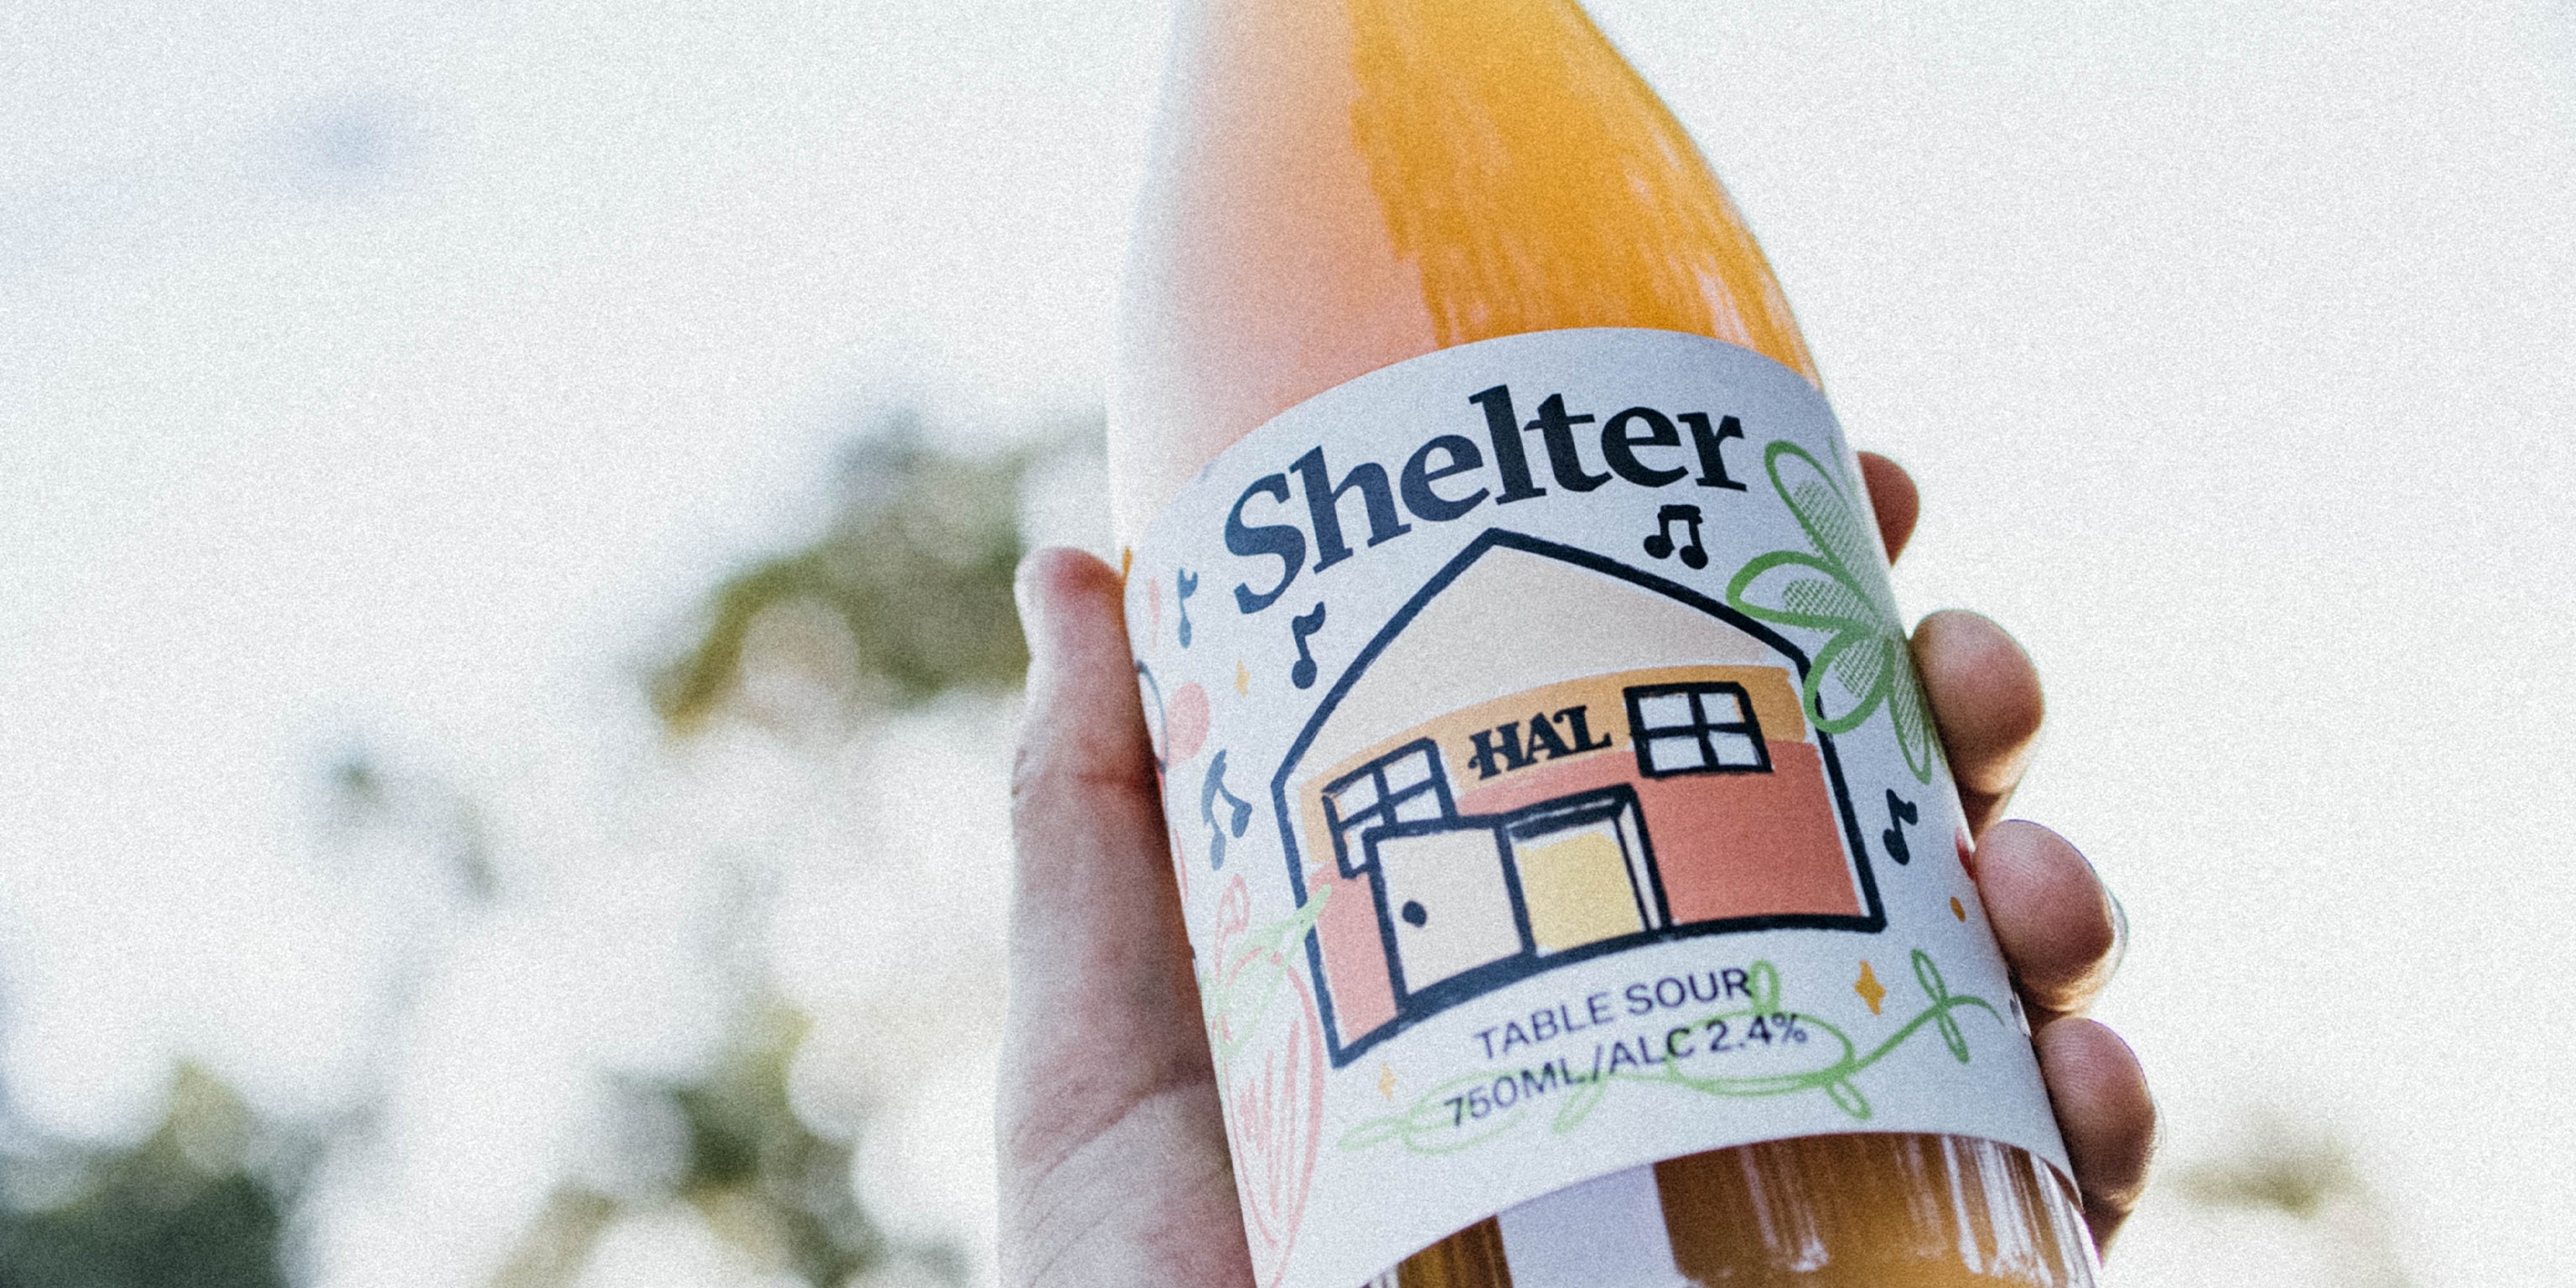 Shelter Brewing Co. x Highs and Lows | Table Sour Collection